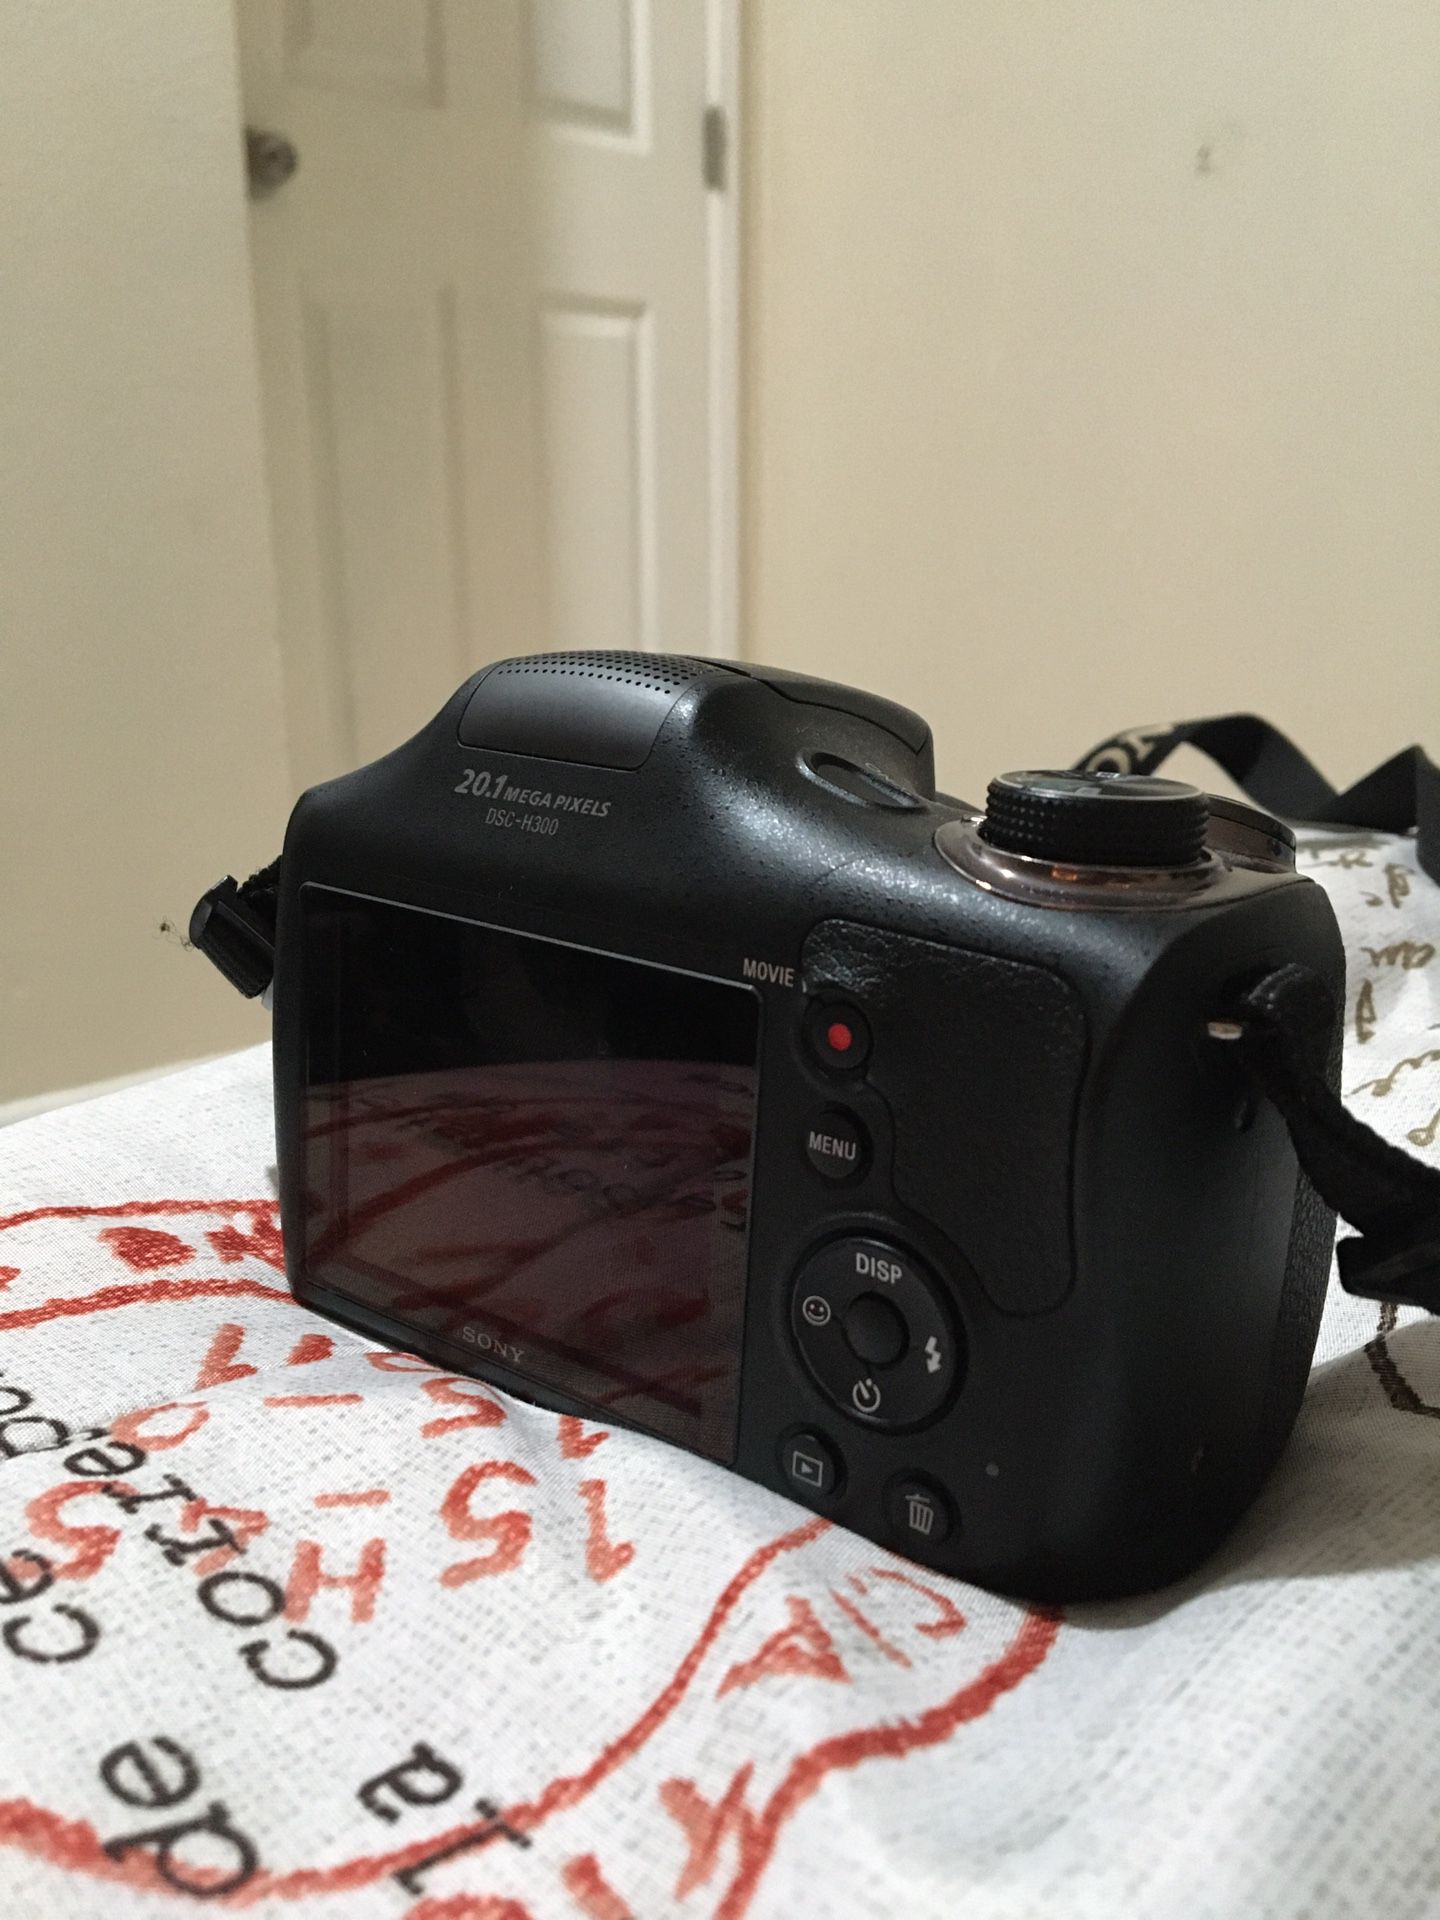 SONY CAMERA FOR SALE